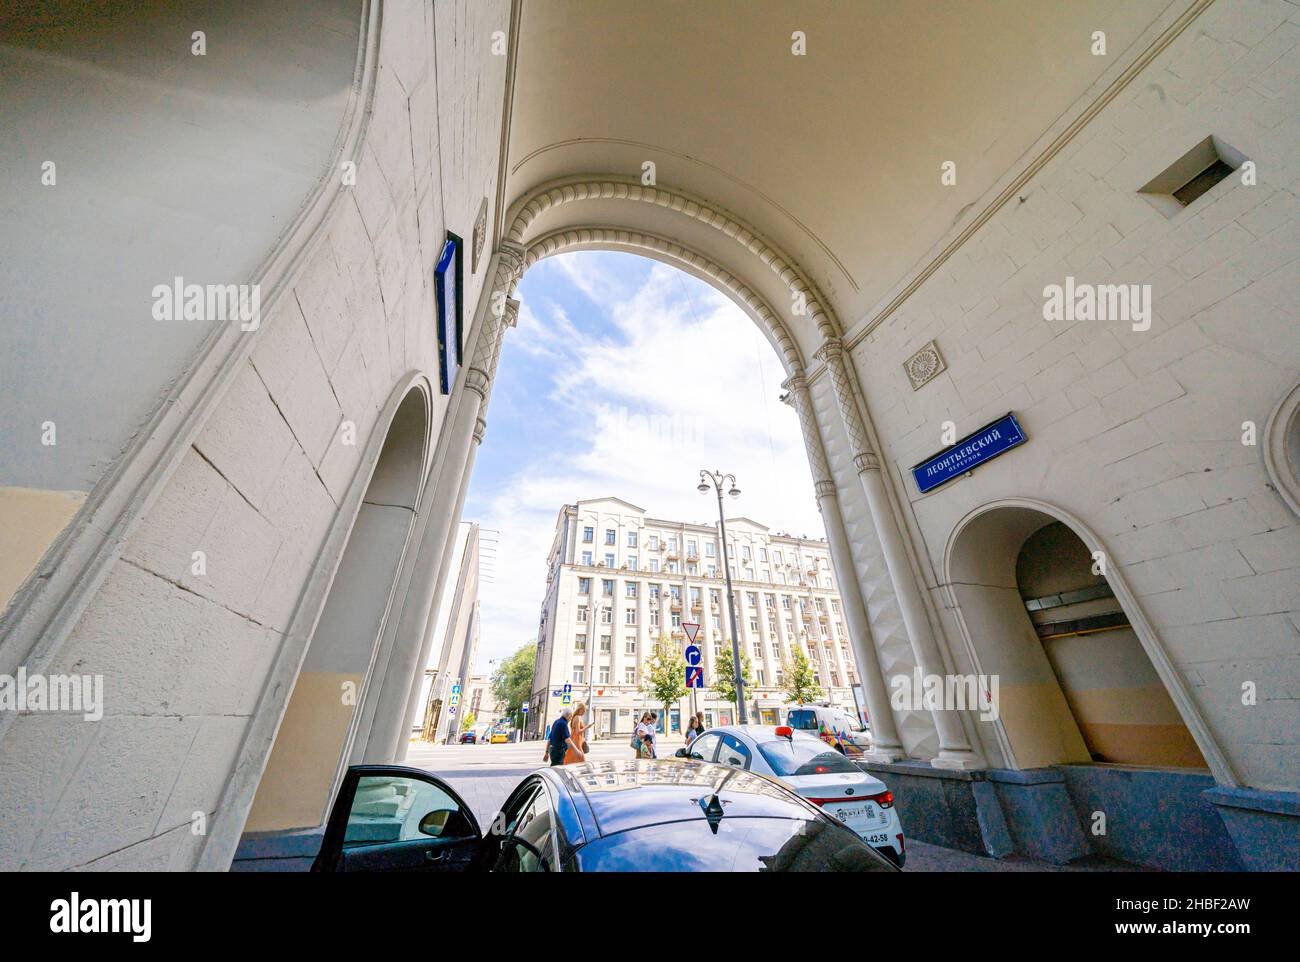 Stalinist architectrure- arch on Tverskaya 15 building, Stalinist socialist classicism, Moscow, Russia Stock Photo